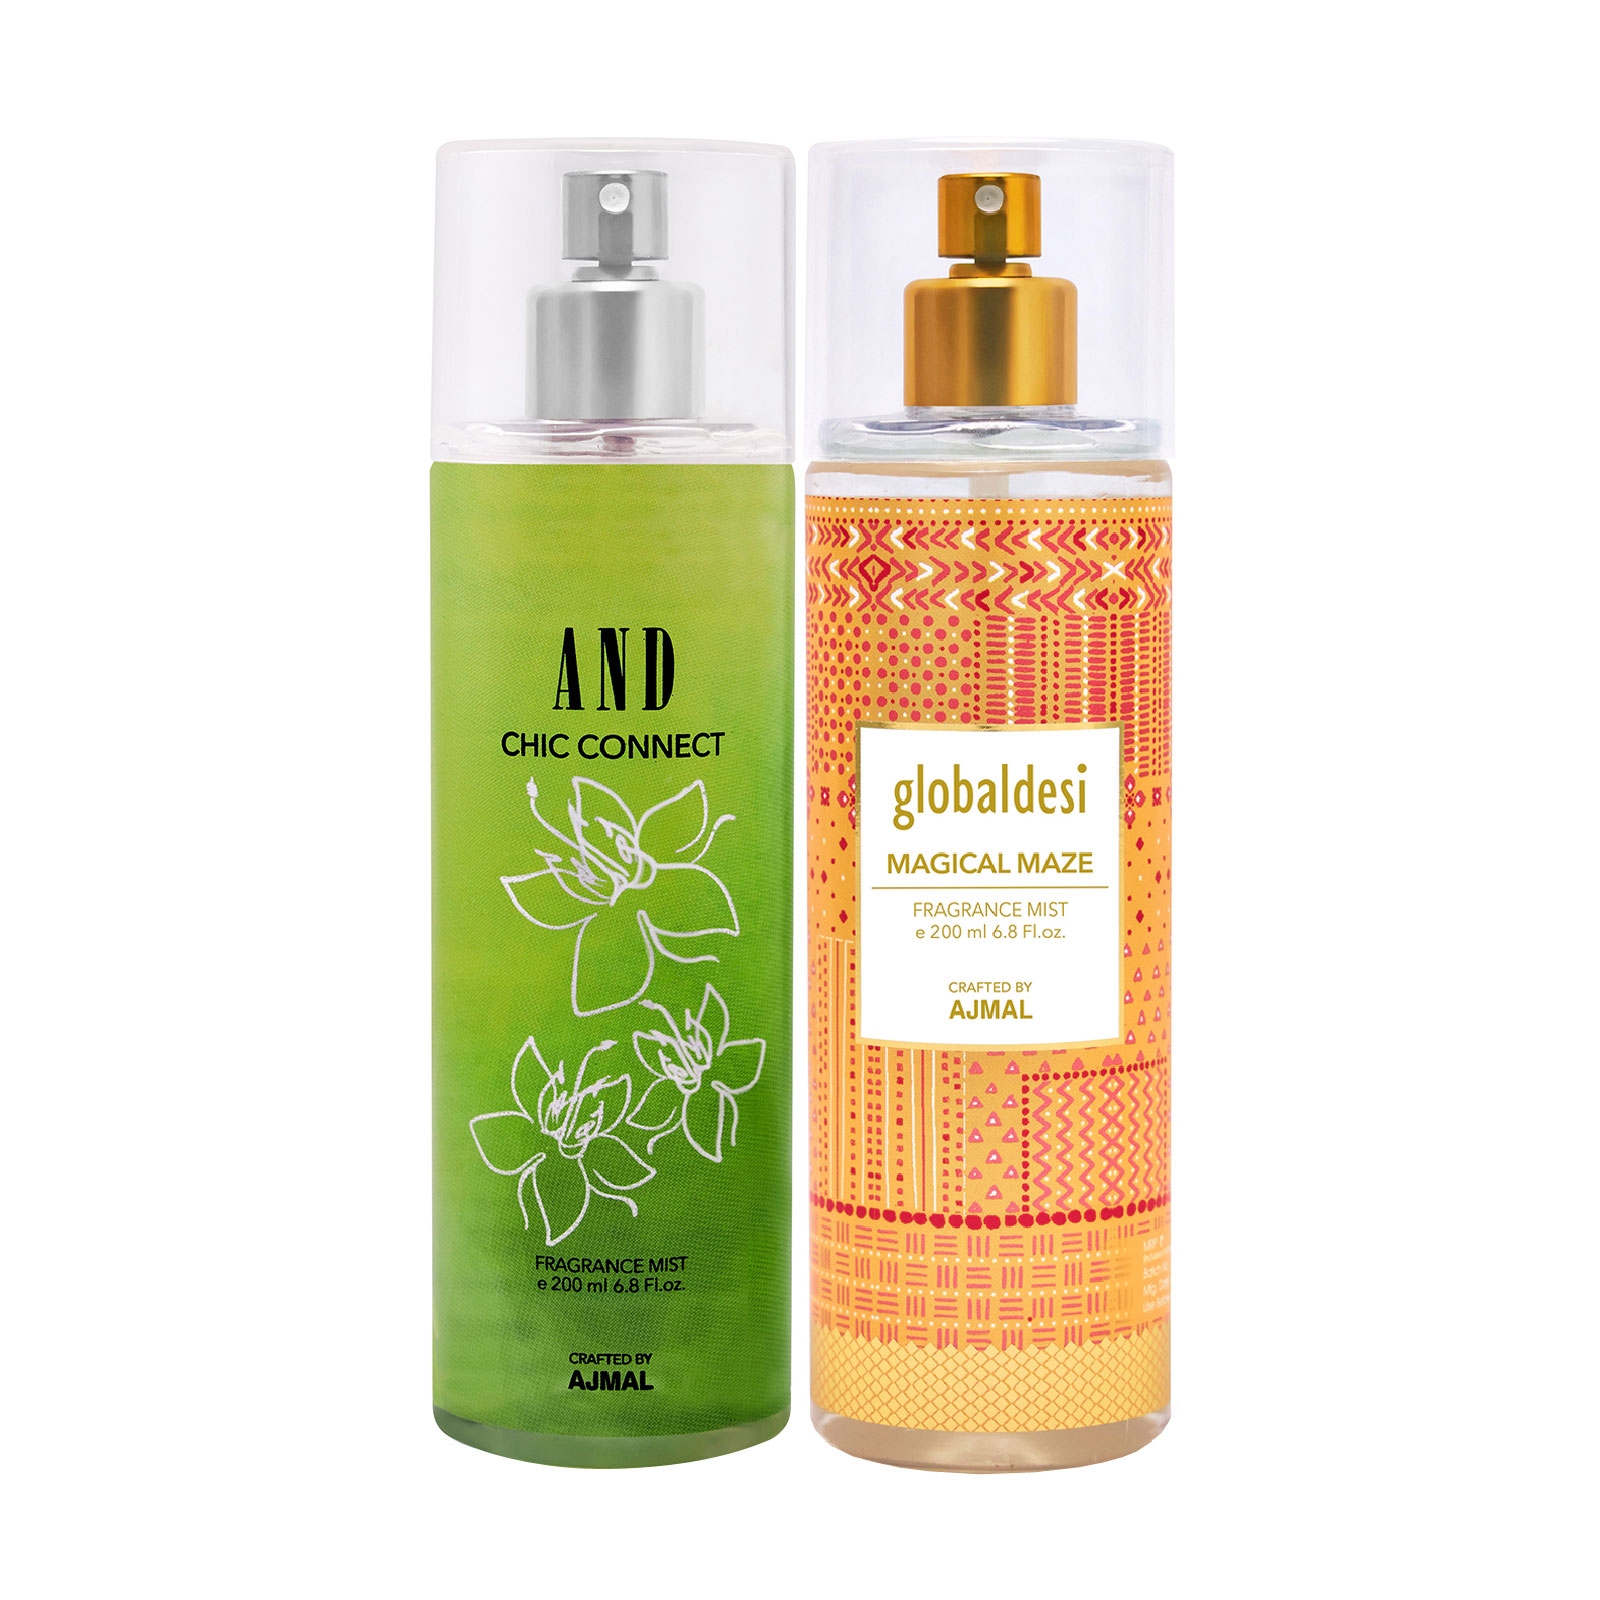 AND Crafted By Ajmal | AND Chi Connect Body Mist 200ML & Global Desi Magical Maze Body Mist 200ML 